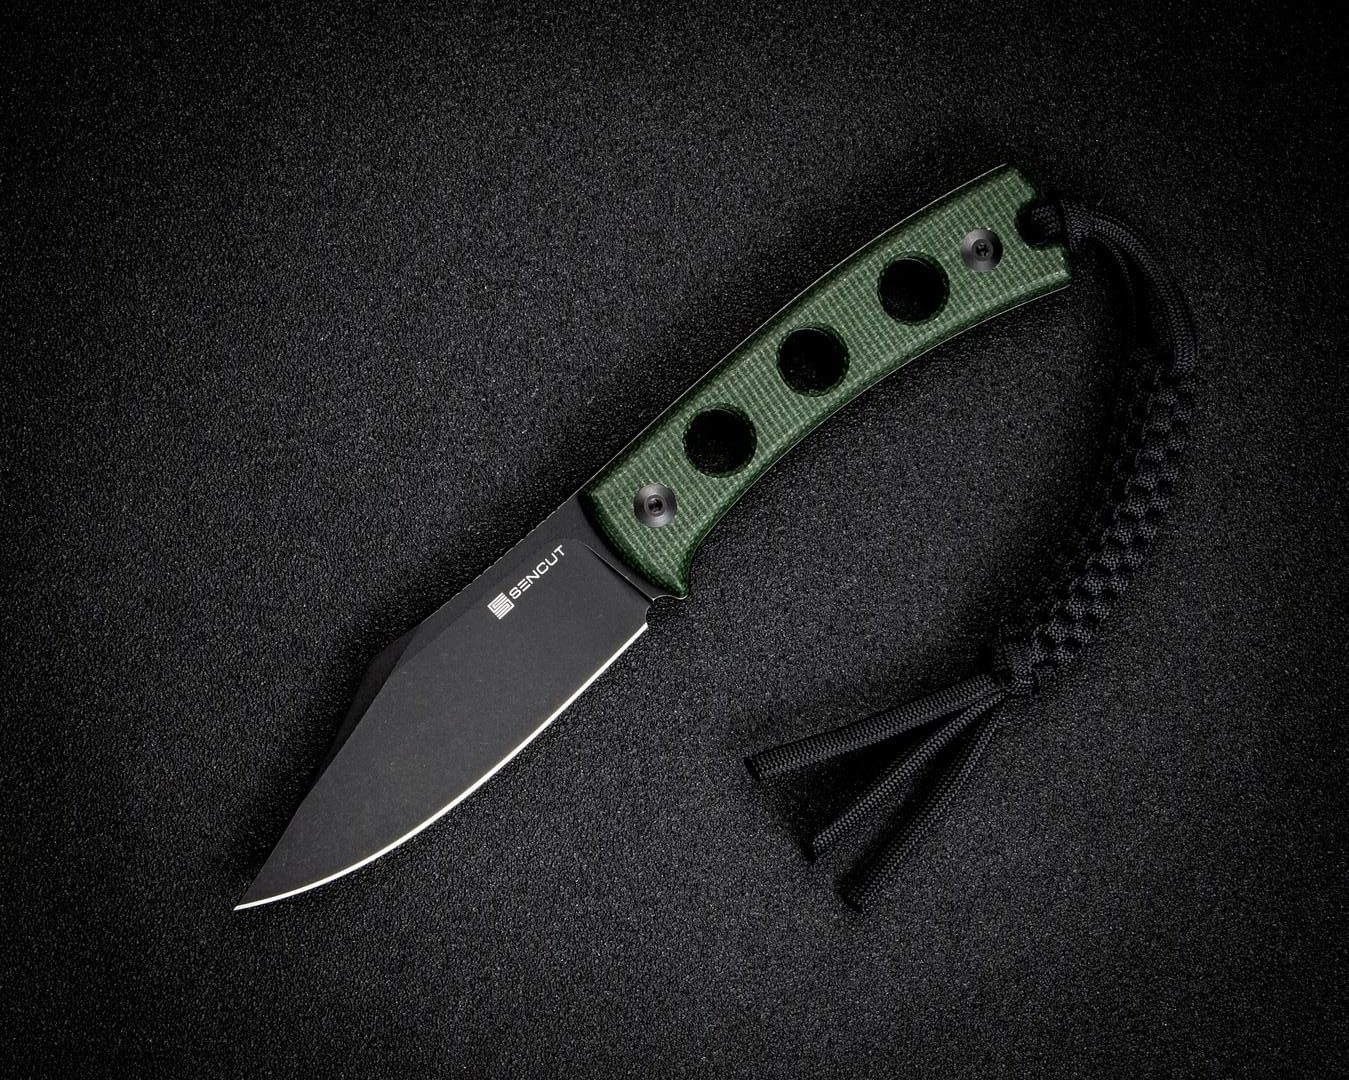 New Flexible Fixed Blade Arrives from Sencut